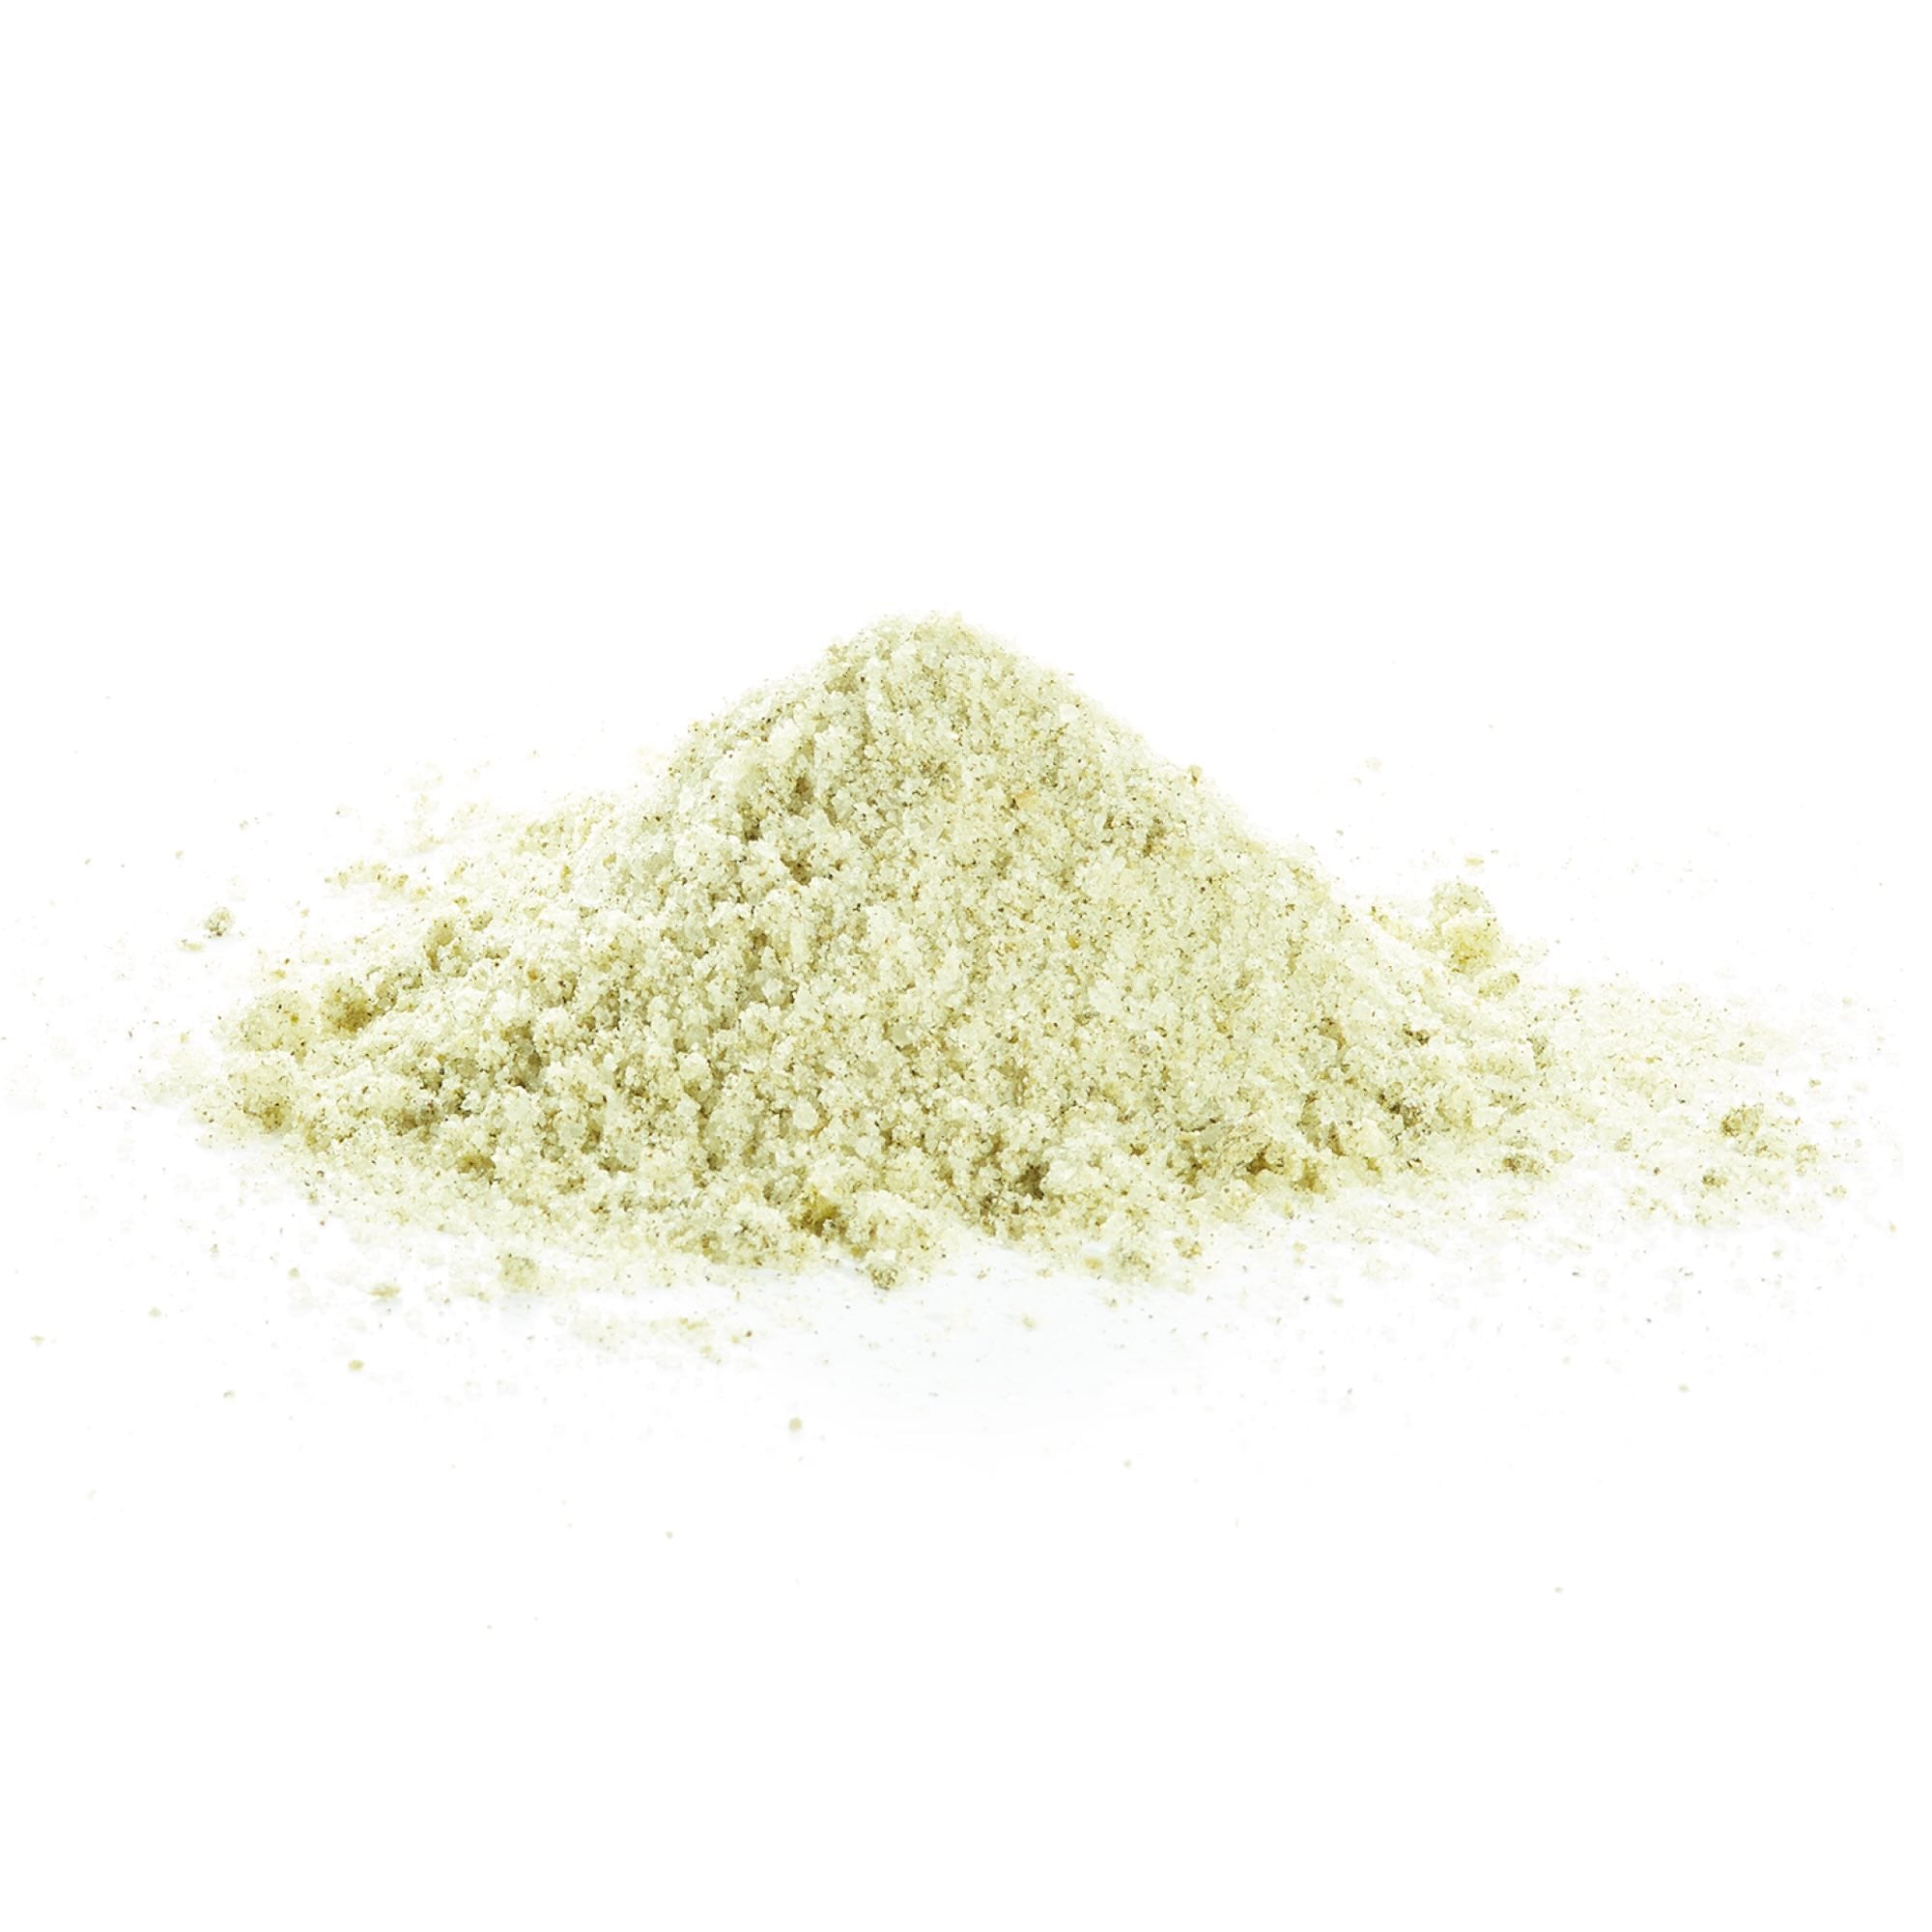 Image of the soothing texture powder on a white background.